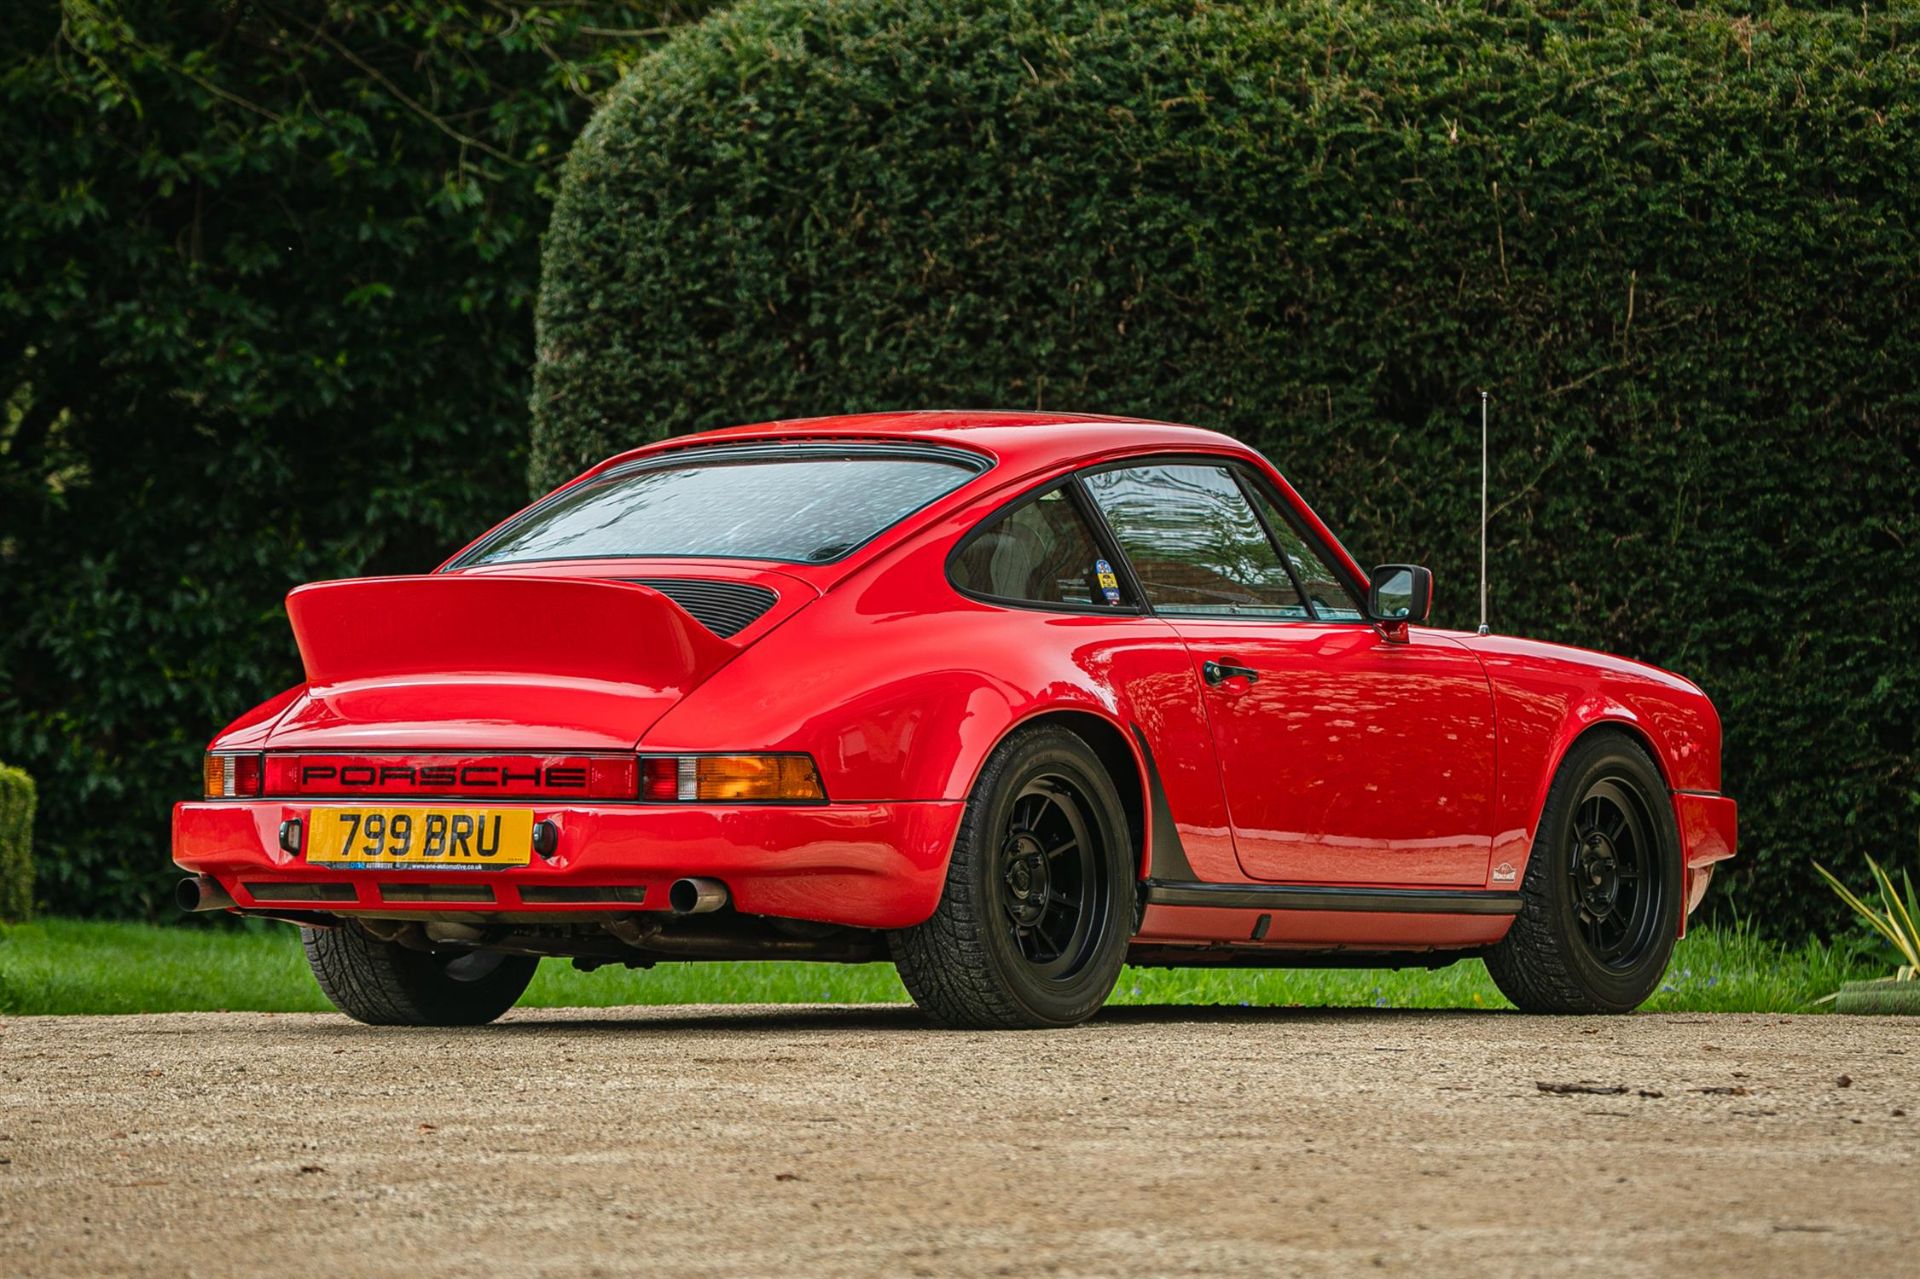 **Sold Pre-Sale**1982 Porsche 911 SC Restomod - Offered Directly From Mike Brewer - Image 4 of 10